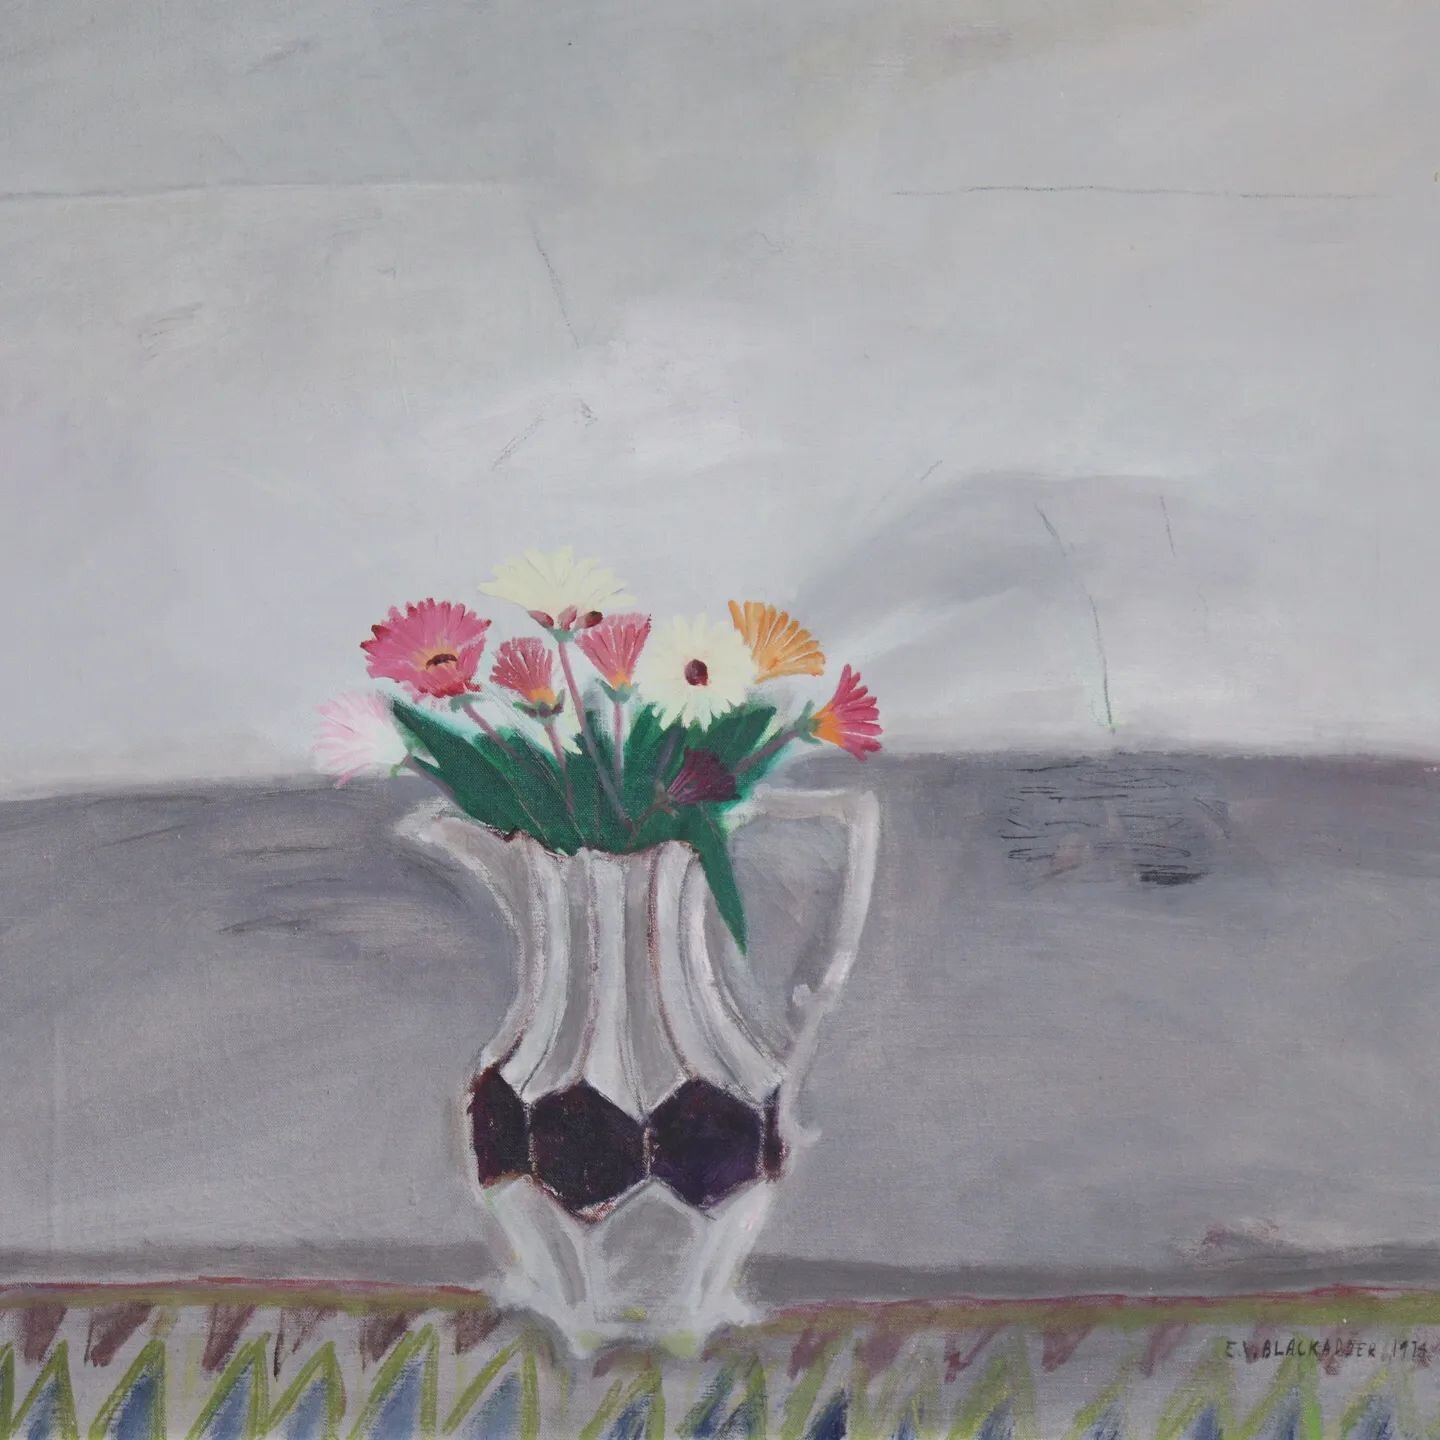 .
Dame Elizabeth Blackadder, OBE, RA, RSA (1931-2021)

Still life, 1974
Oil on Canvas

Included in our 26th March Fine Art &amp; Antiques Sale

🌼Entries invited until 16th March.

.

.

.

.

.

.

.

.

.

.

#fineart #art #stilllife #stilllifepain